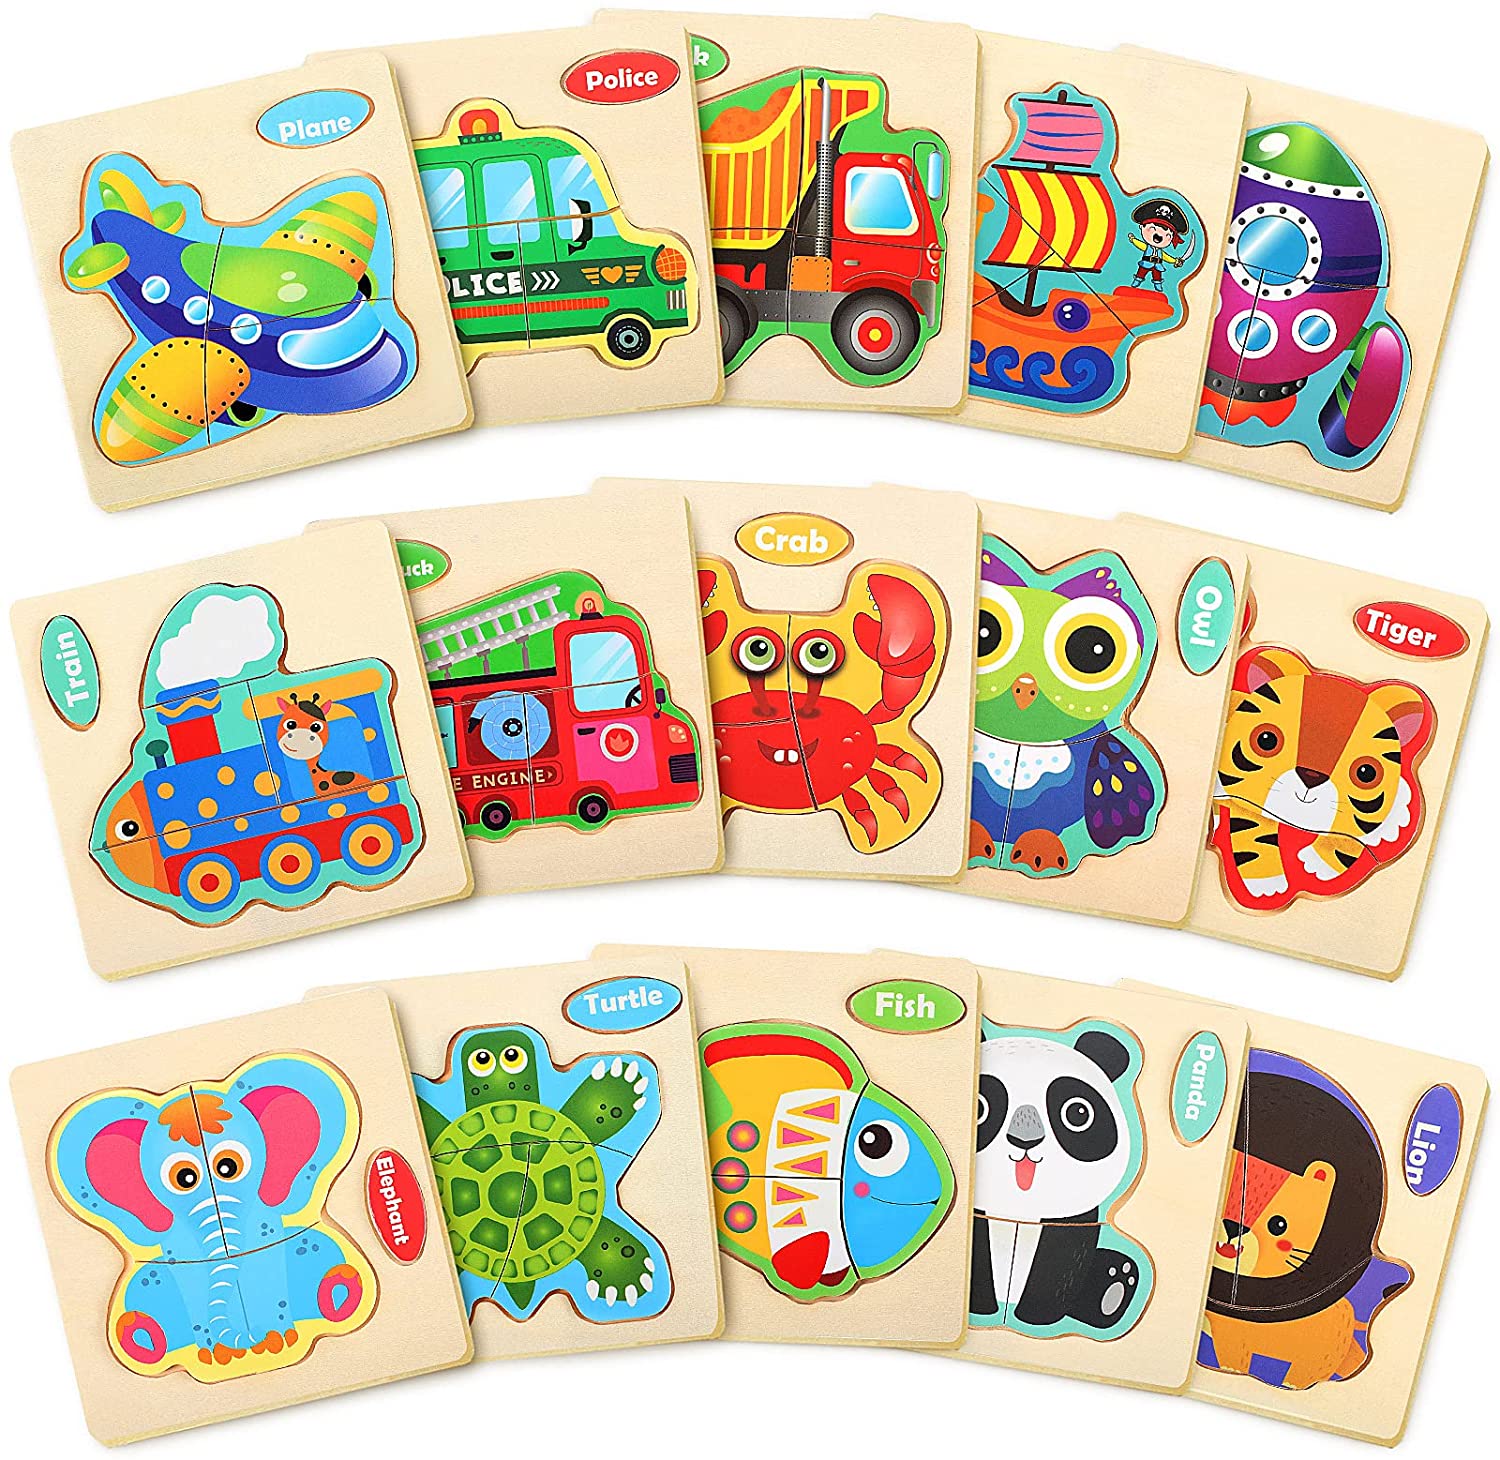 15 Pack Wooden Puzzles for Toddlers 3 Years Animal Vehicle Jigsaw Puzzle Educational Kids Puzzles Toys Montessori Learning Jigsaw Toy